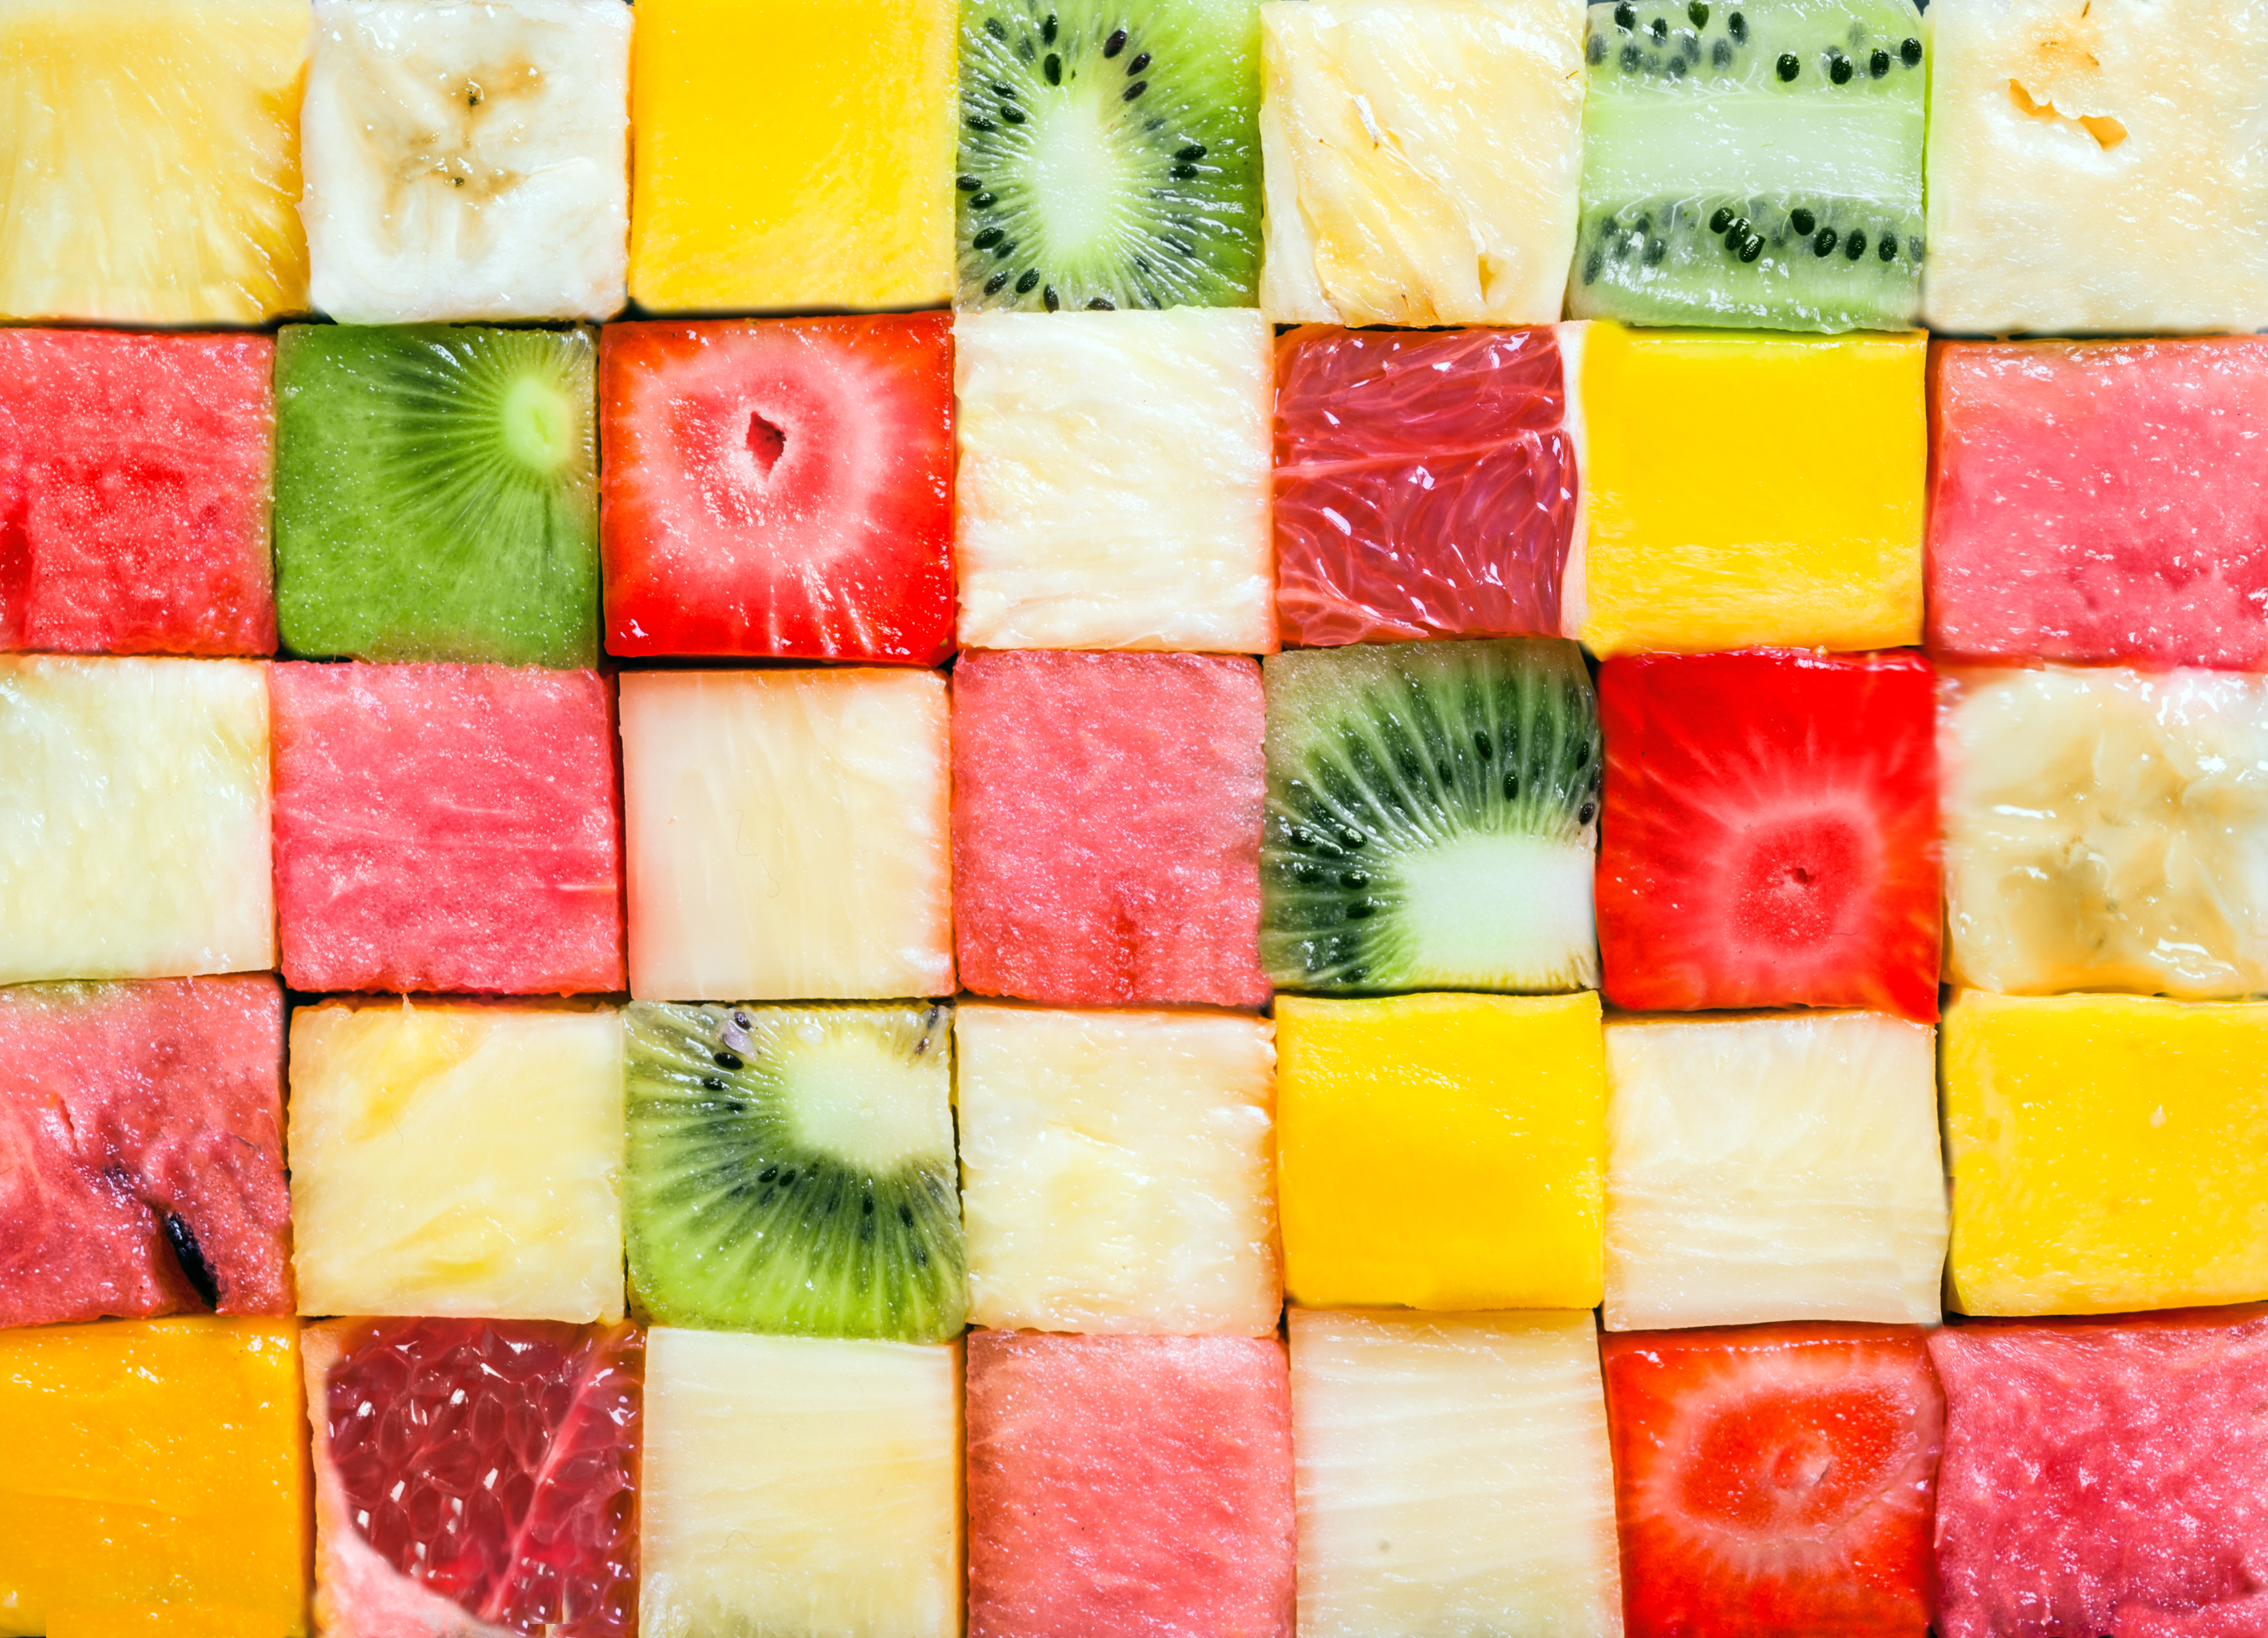 Seamless background pattern and texture of colourful fresh diced tropical fruit cubes arranged in a geometric pattern with melon, watermelon, banana, pineapple, strawberry, kiwifruit and grapefruit